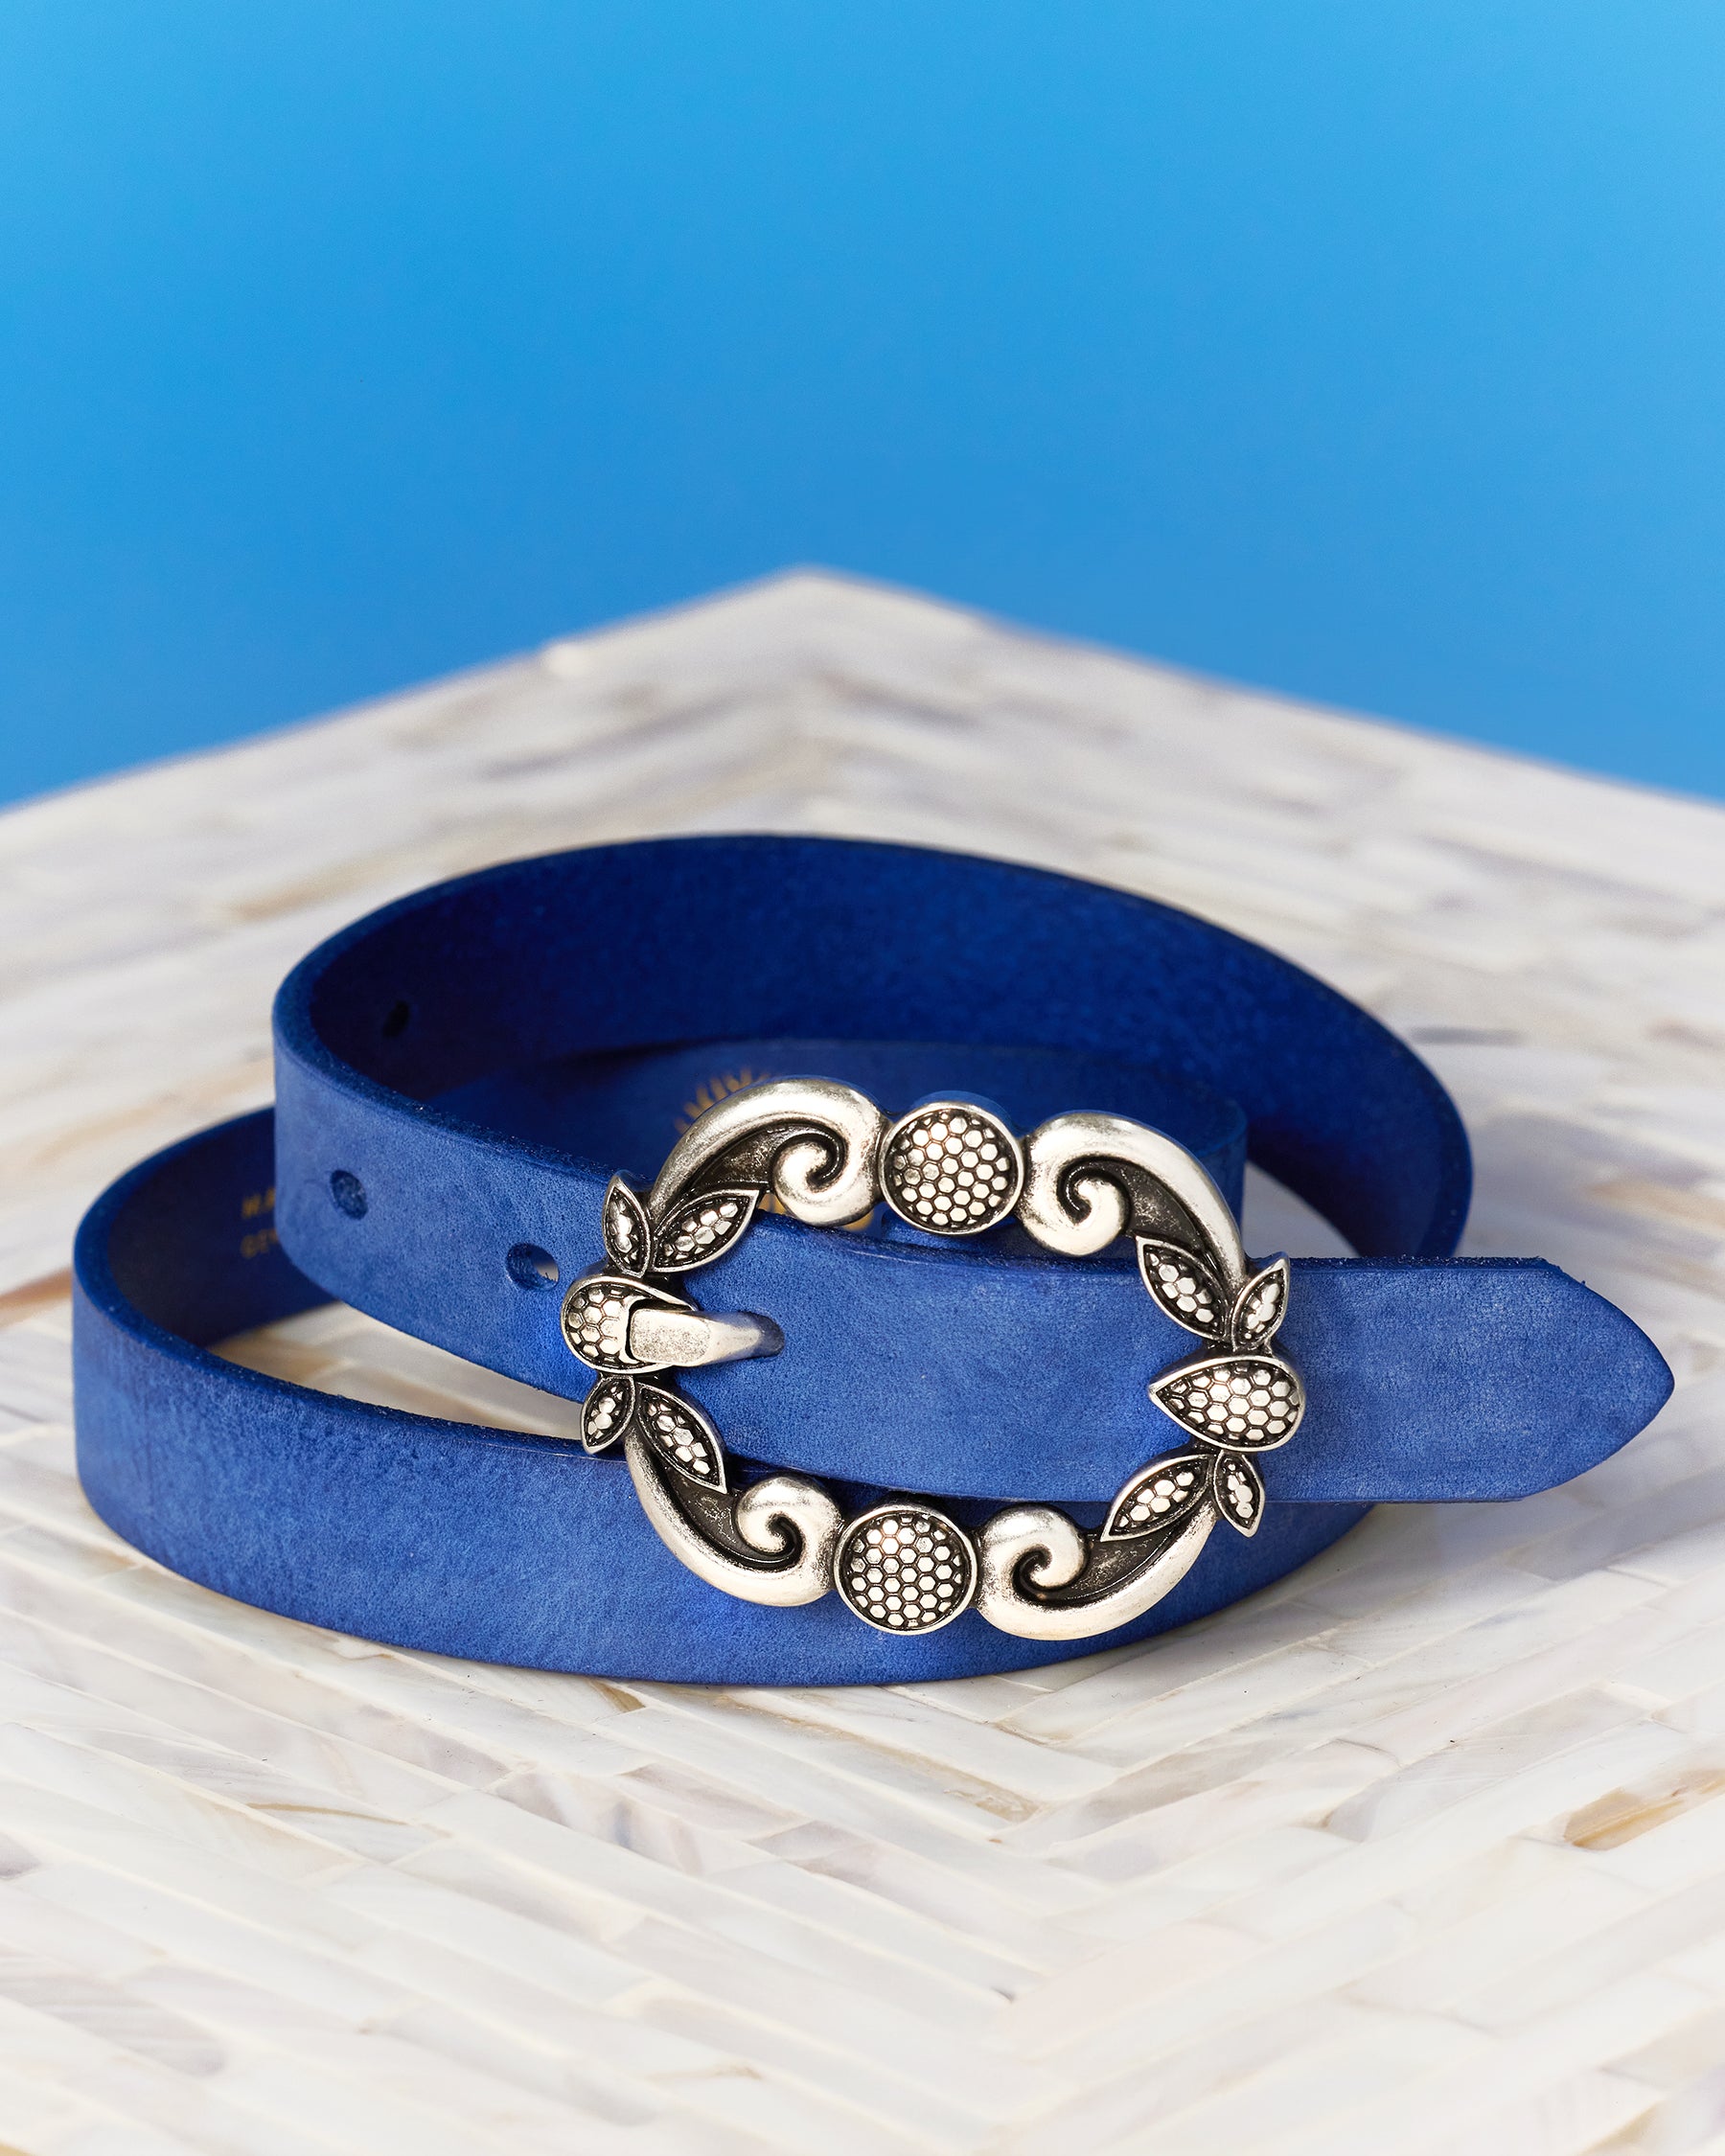 Harper Leather Belt in Indigo Blue rolled up and shown as a still life